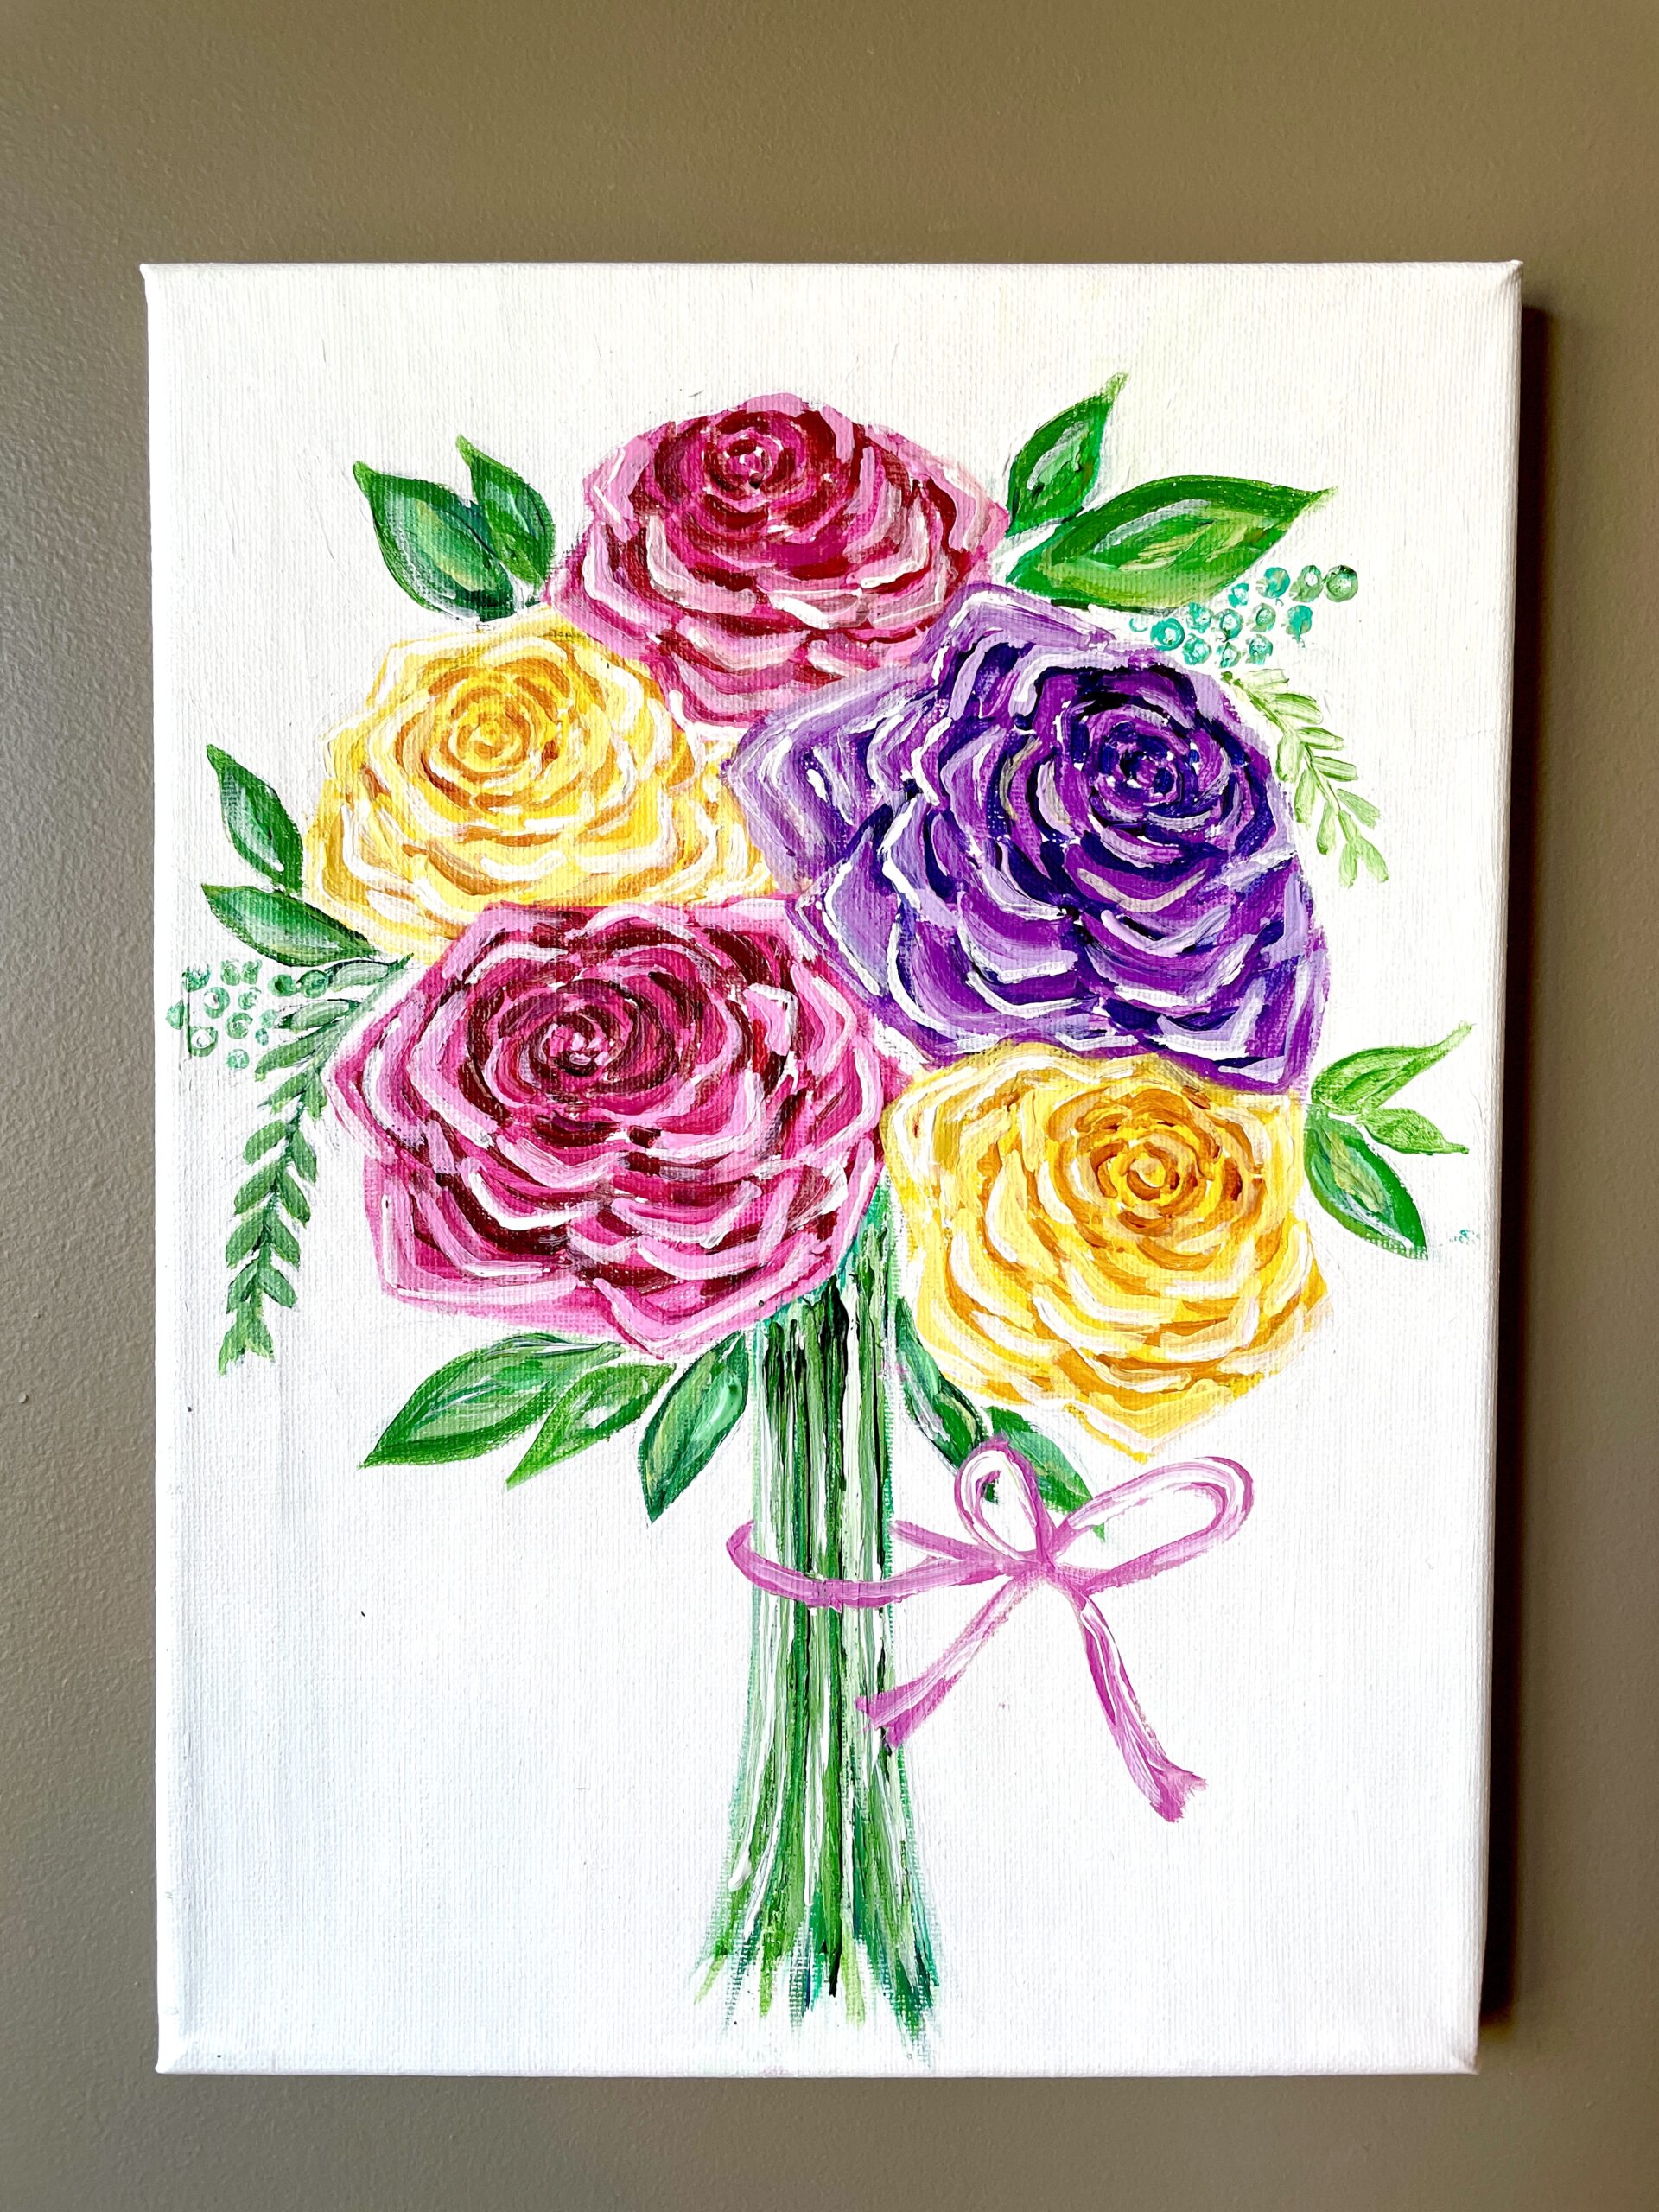 How To Paint Roses In 12 Easy Steps - Acrylics For Beginners